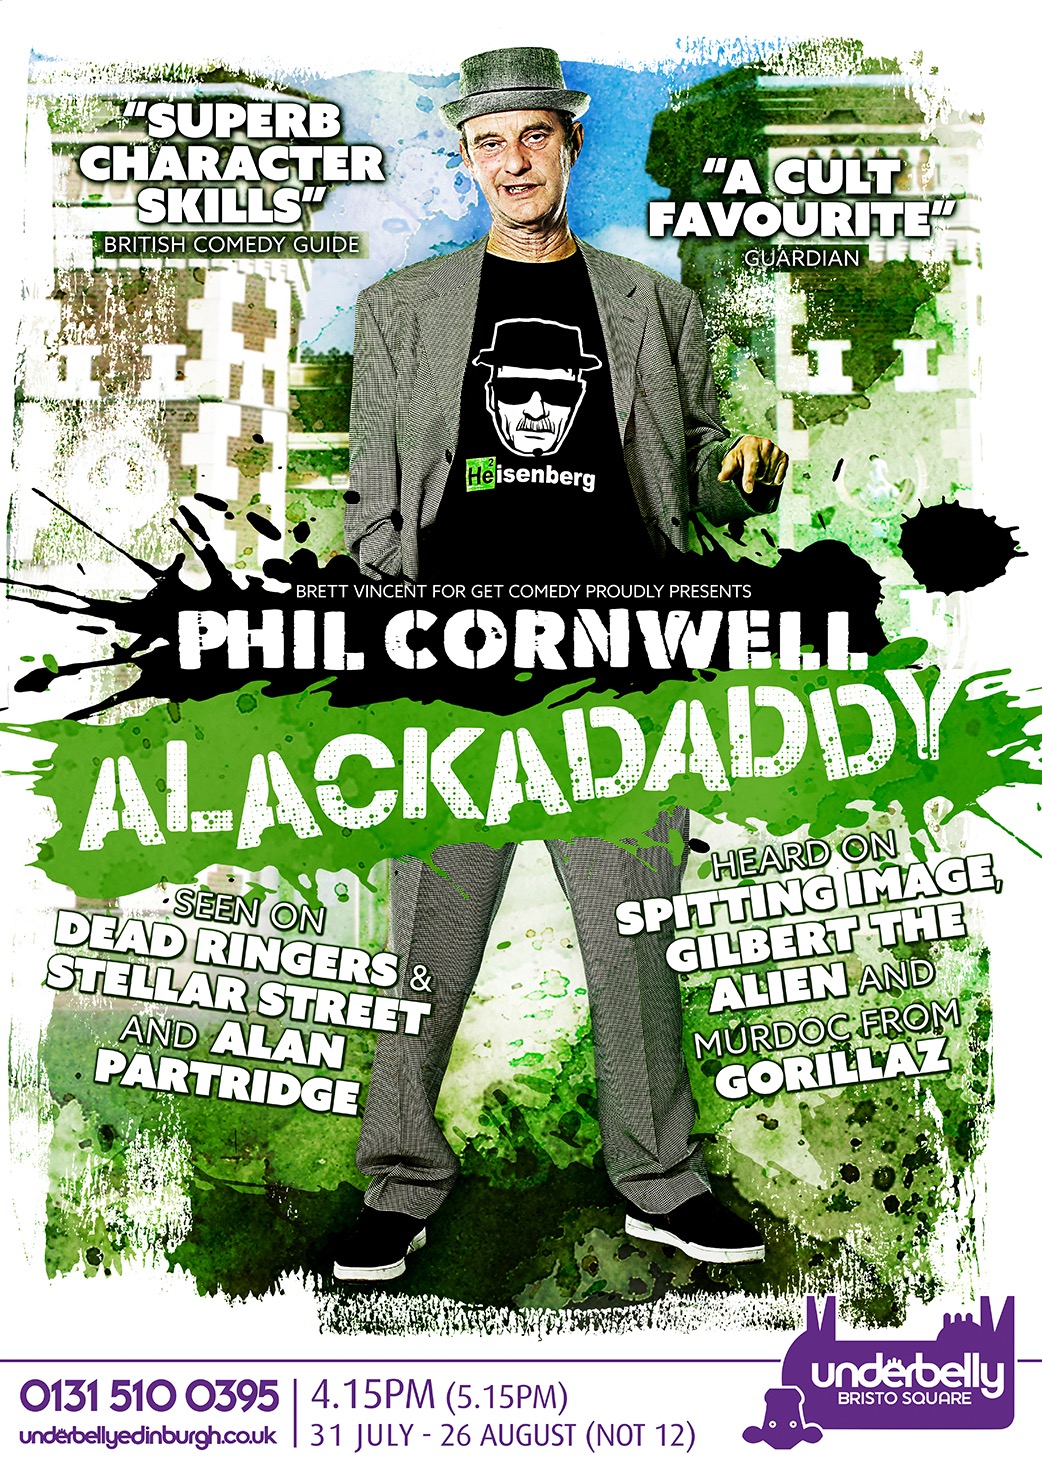 The poster for Phil Cornwell: Alackadaddy